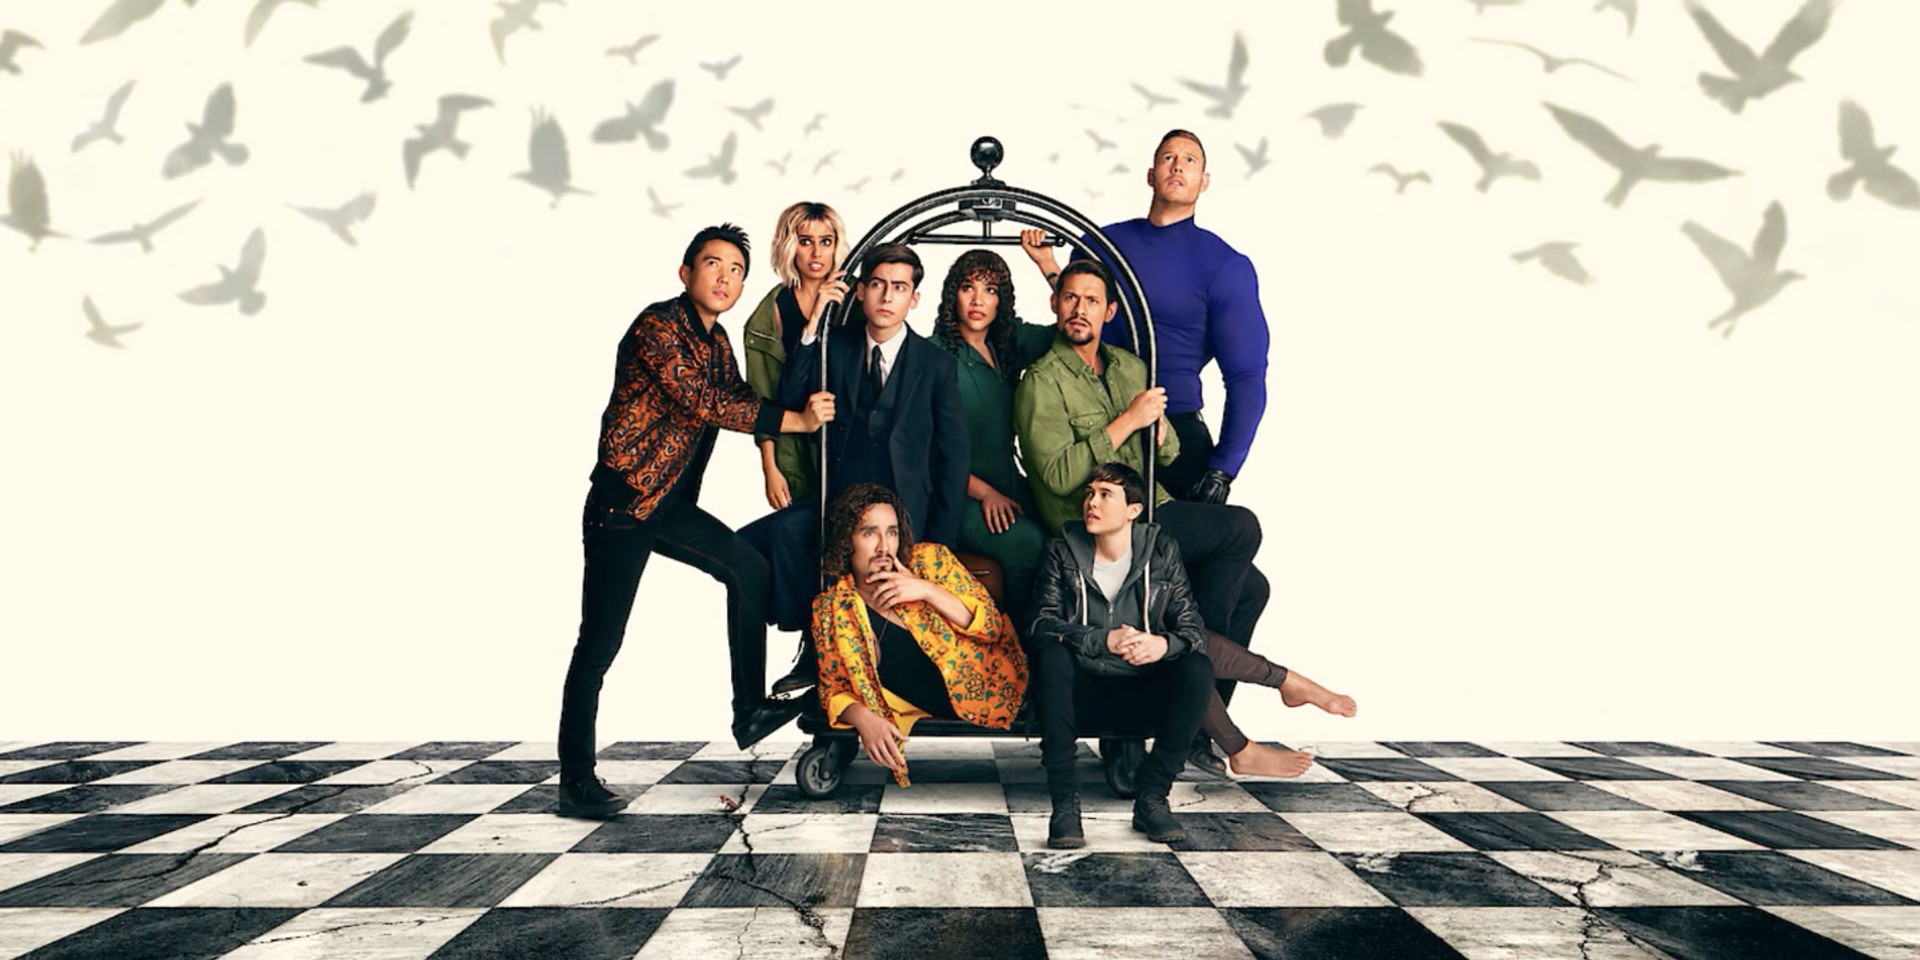 10 standout songs from The Umbrella Academy Season 3: Queen, Nelly, The Rescues, and more